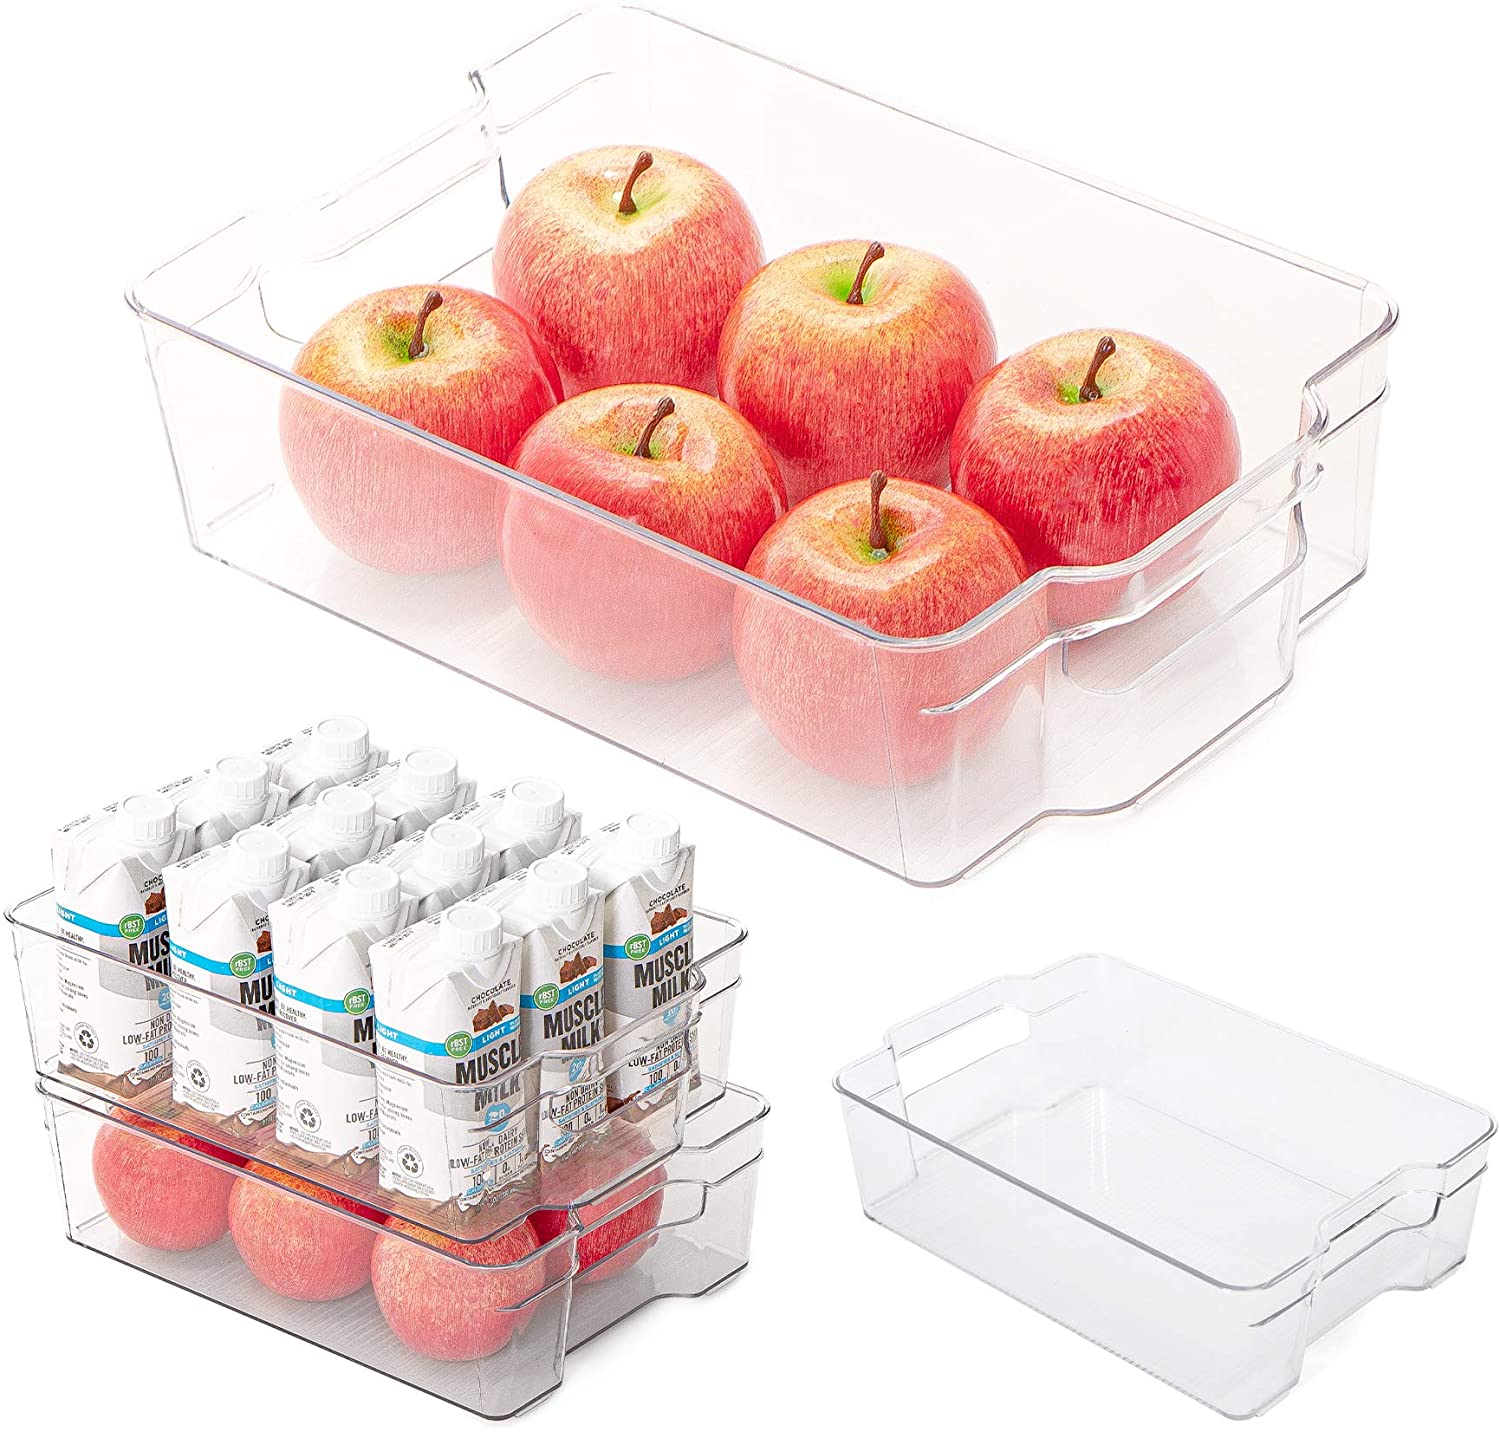 Stackable Refrigerator Organizer Bins, Fridge Clear Bins With Handles  Kitchen Organizer Container for Freezer, Pantry, Cabinets, Drawer, Shelves